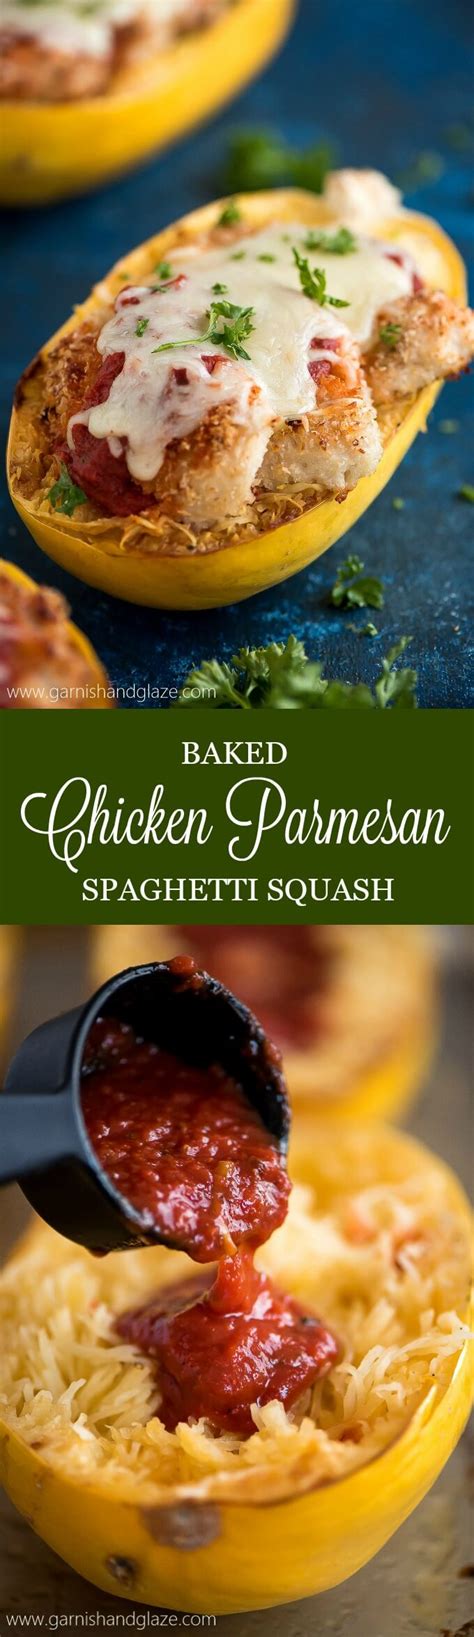 The chicken parmesan plus the spaghetti squash comes in at 360 calories, 34g of protein, 25g of carbohydrates, and 7g of filling fiber! Baked Chicken Parmesan Spaghetti Squash - Garnish & Glaze